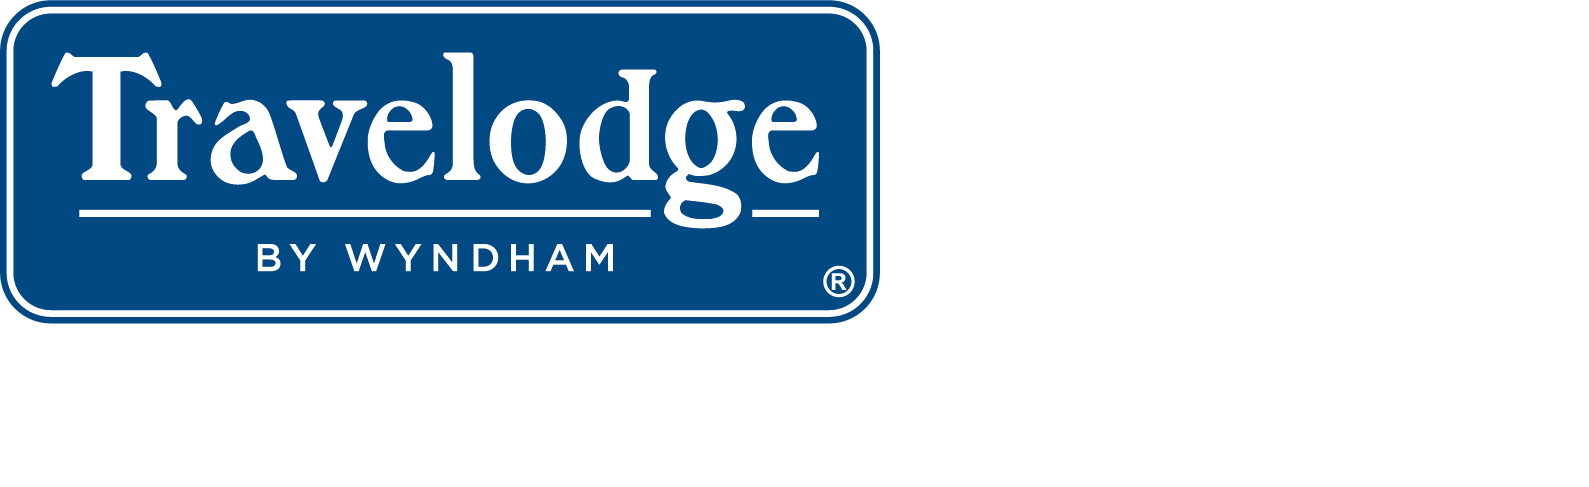 Travelodge Logo - Travelodge Hotel and Convention Center | Hotel in Quebec City